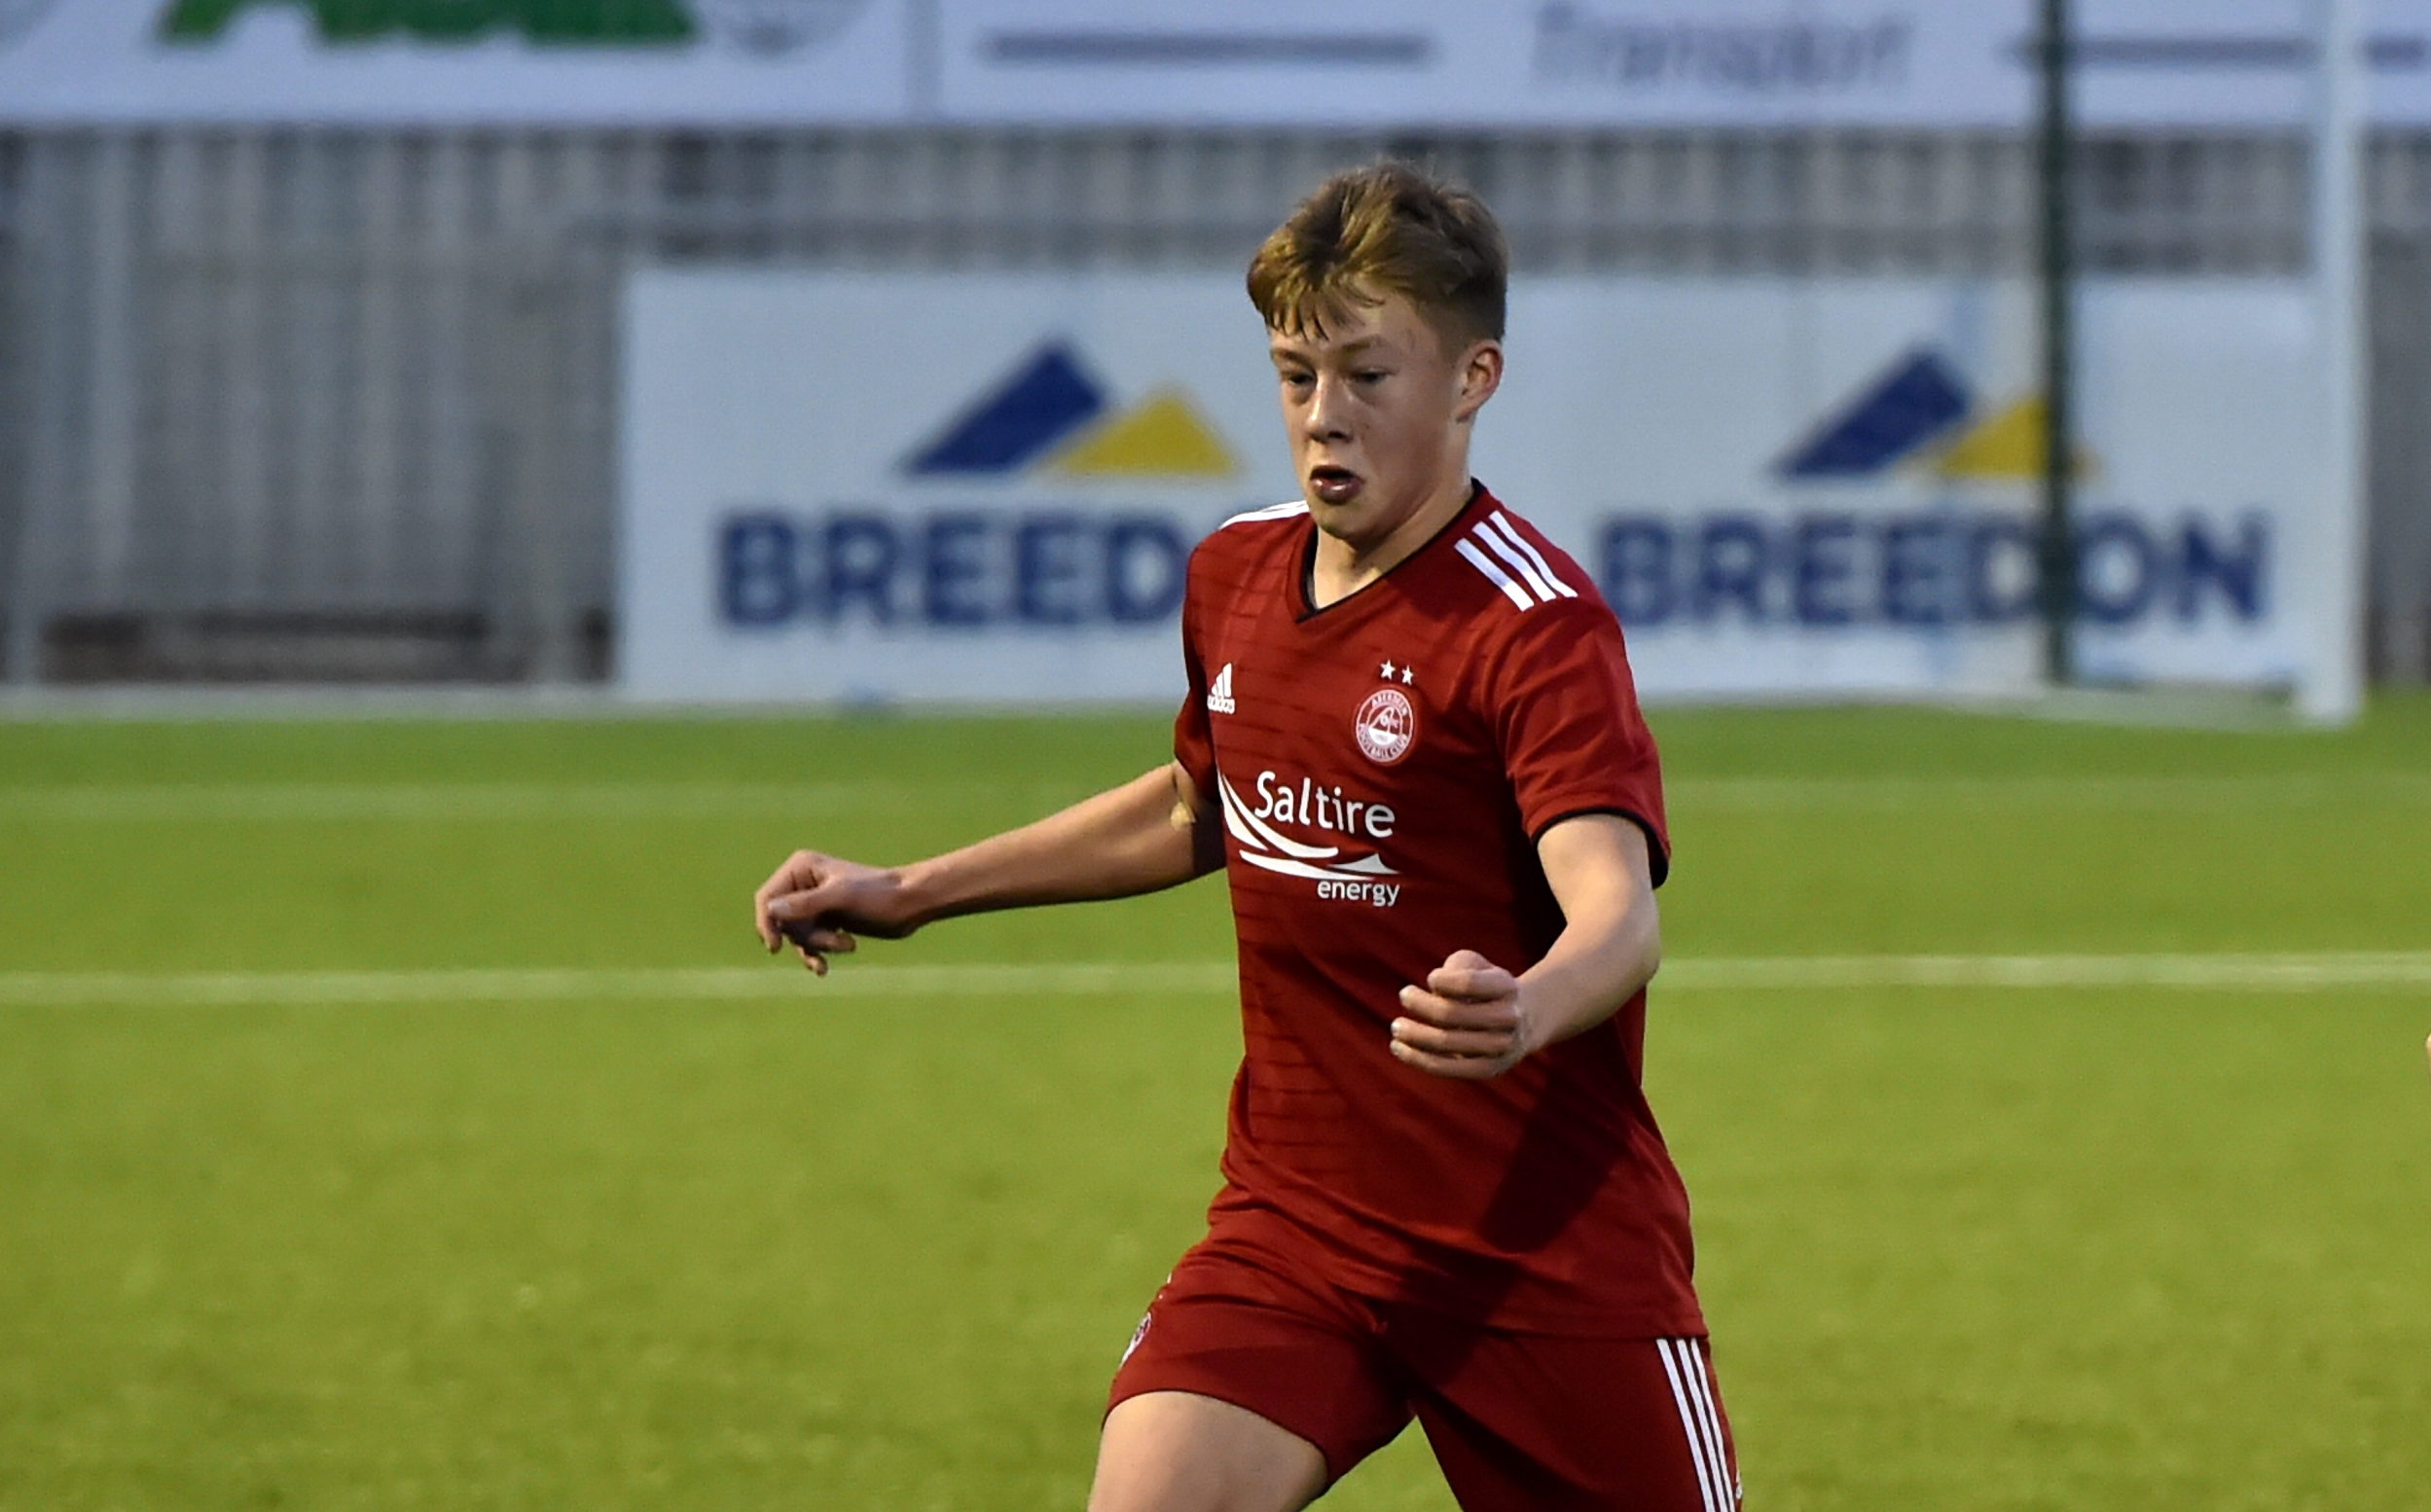 Connor Barron opened the scoring for Aberdeen.